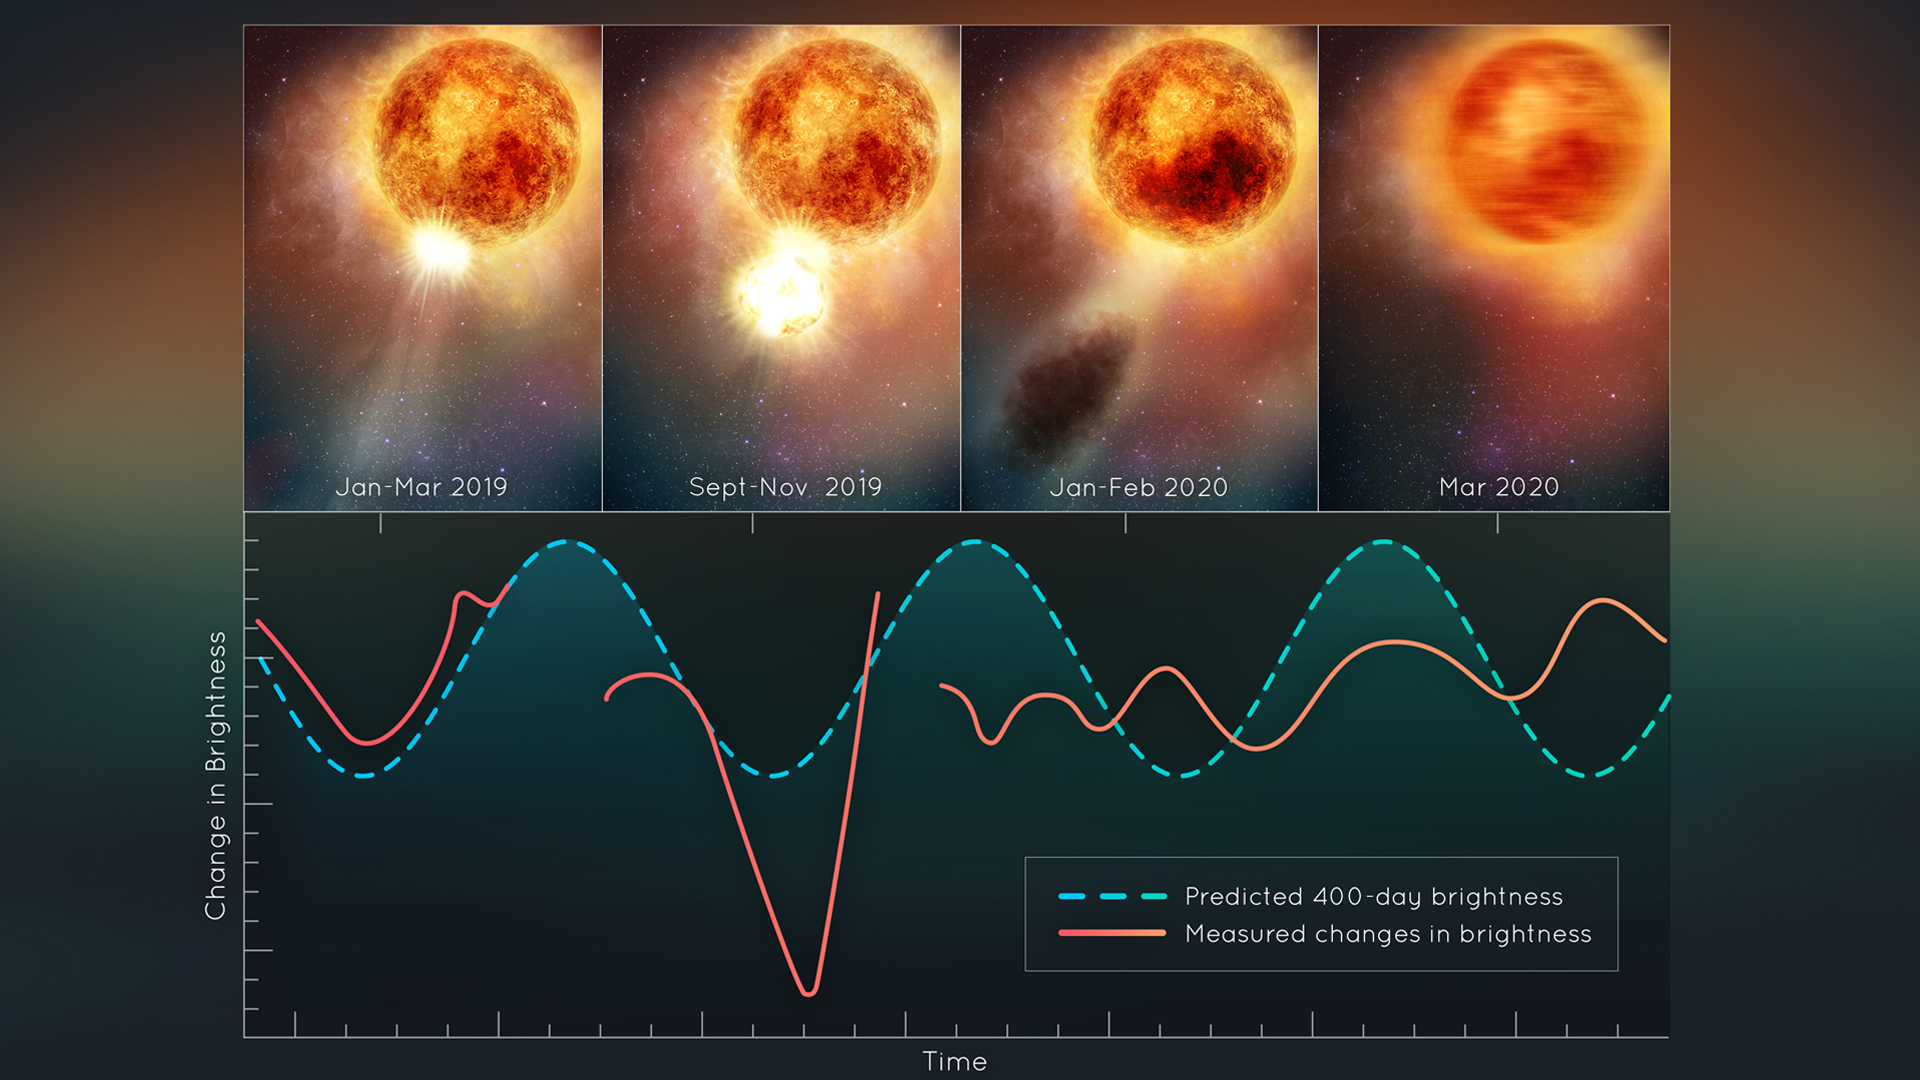 This illustration plots changes in brightness of the red supergiant star Betelgeuse, following the titanic mass ejection of a large piece of its visible surface. The escaping material cooled to form a cloud of dust that temporarily made the star look dimmer, as seen from Earth. This unprecedented stellar convulsion disrupted the monster star’s 400-day-long oscillation period that astronomers had measured for more than 200 years. The interior may now be jiggling like a plate of gelatin dessert.